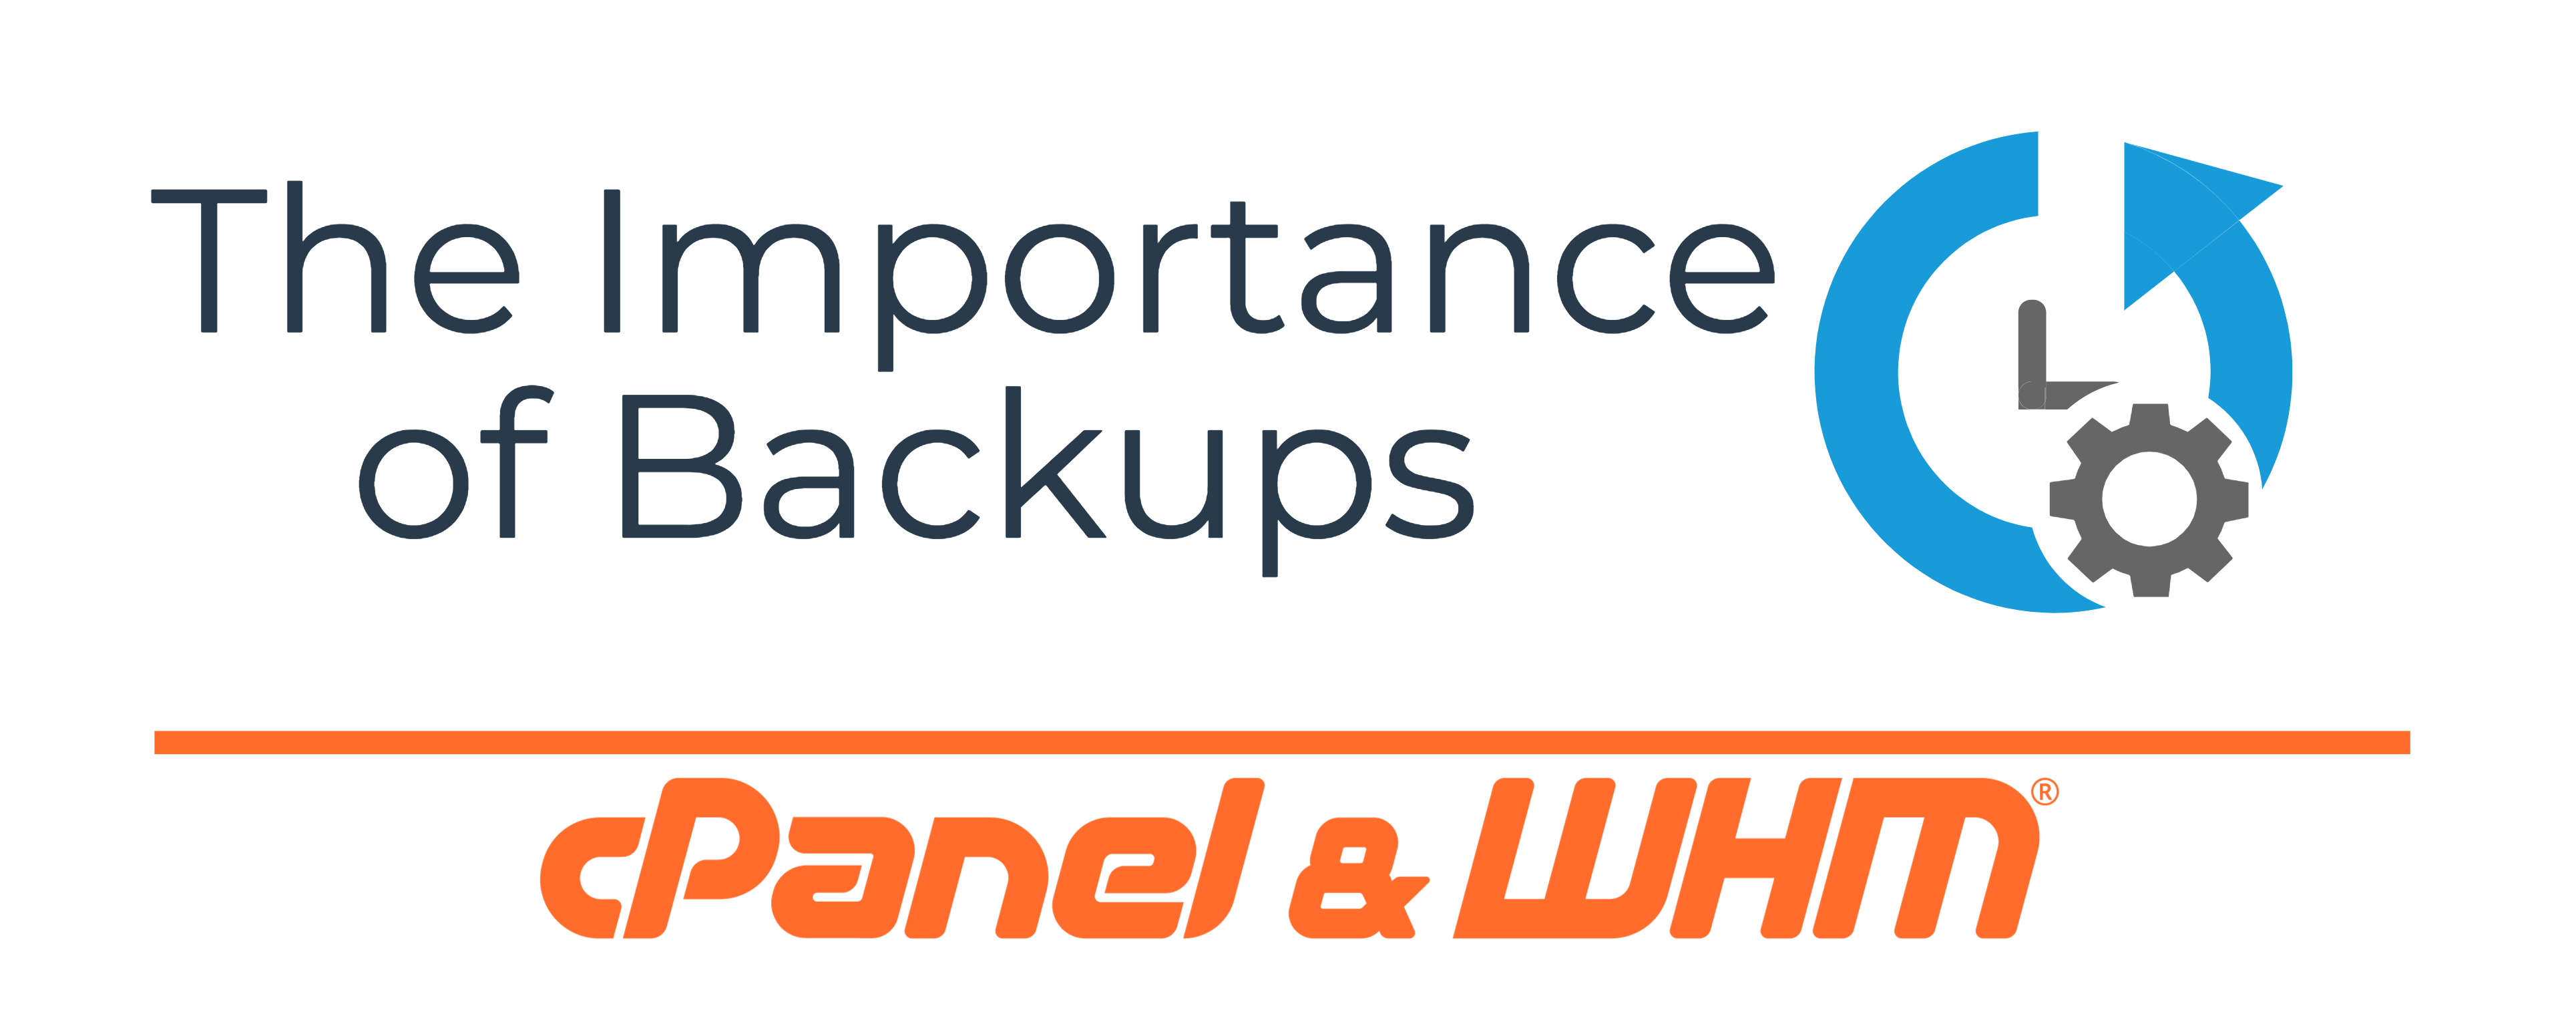 The Importance of Being Earnest (about Backups)